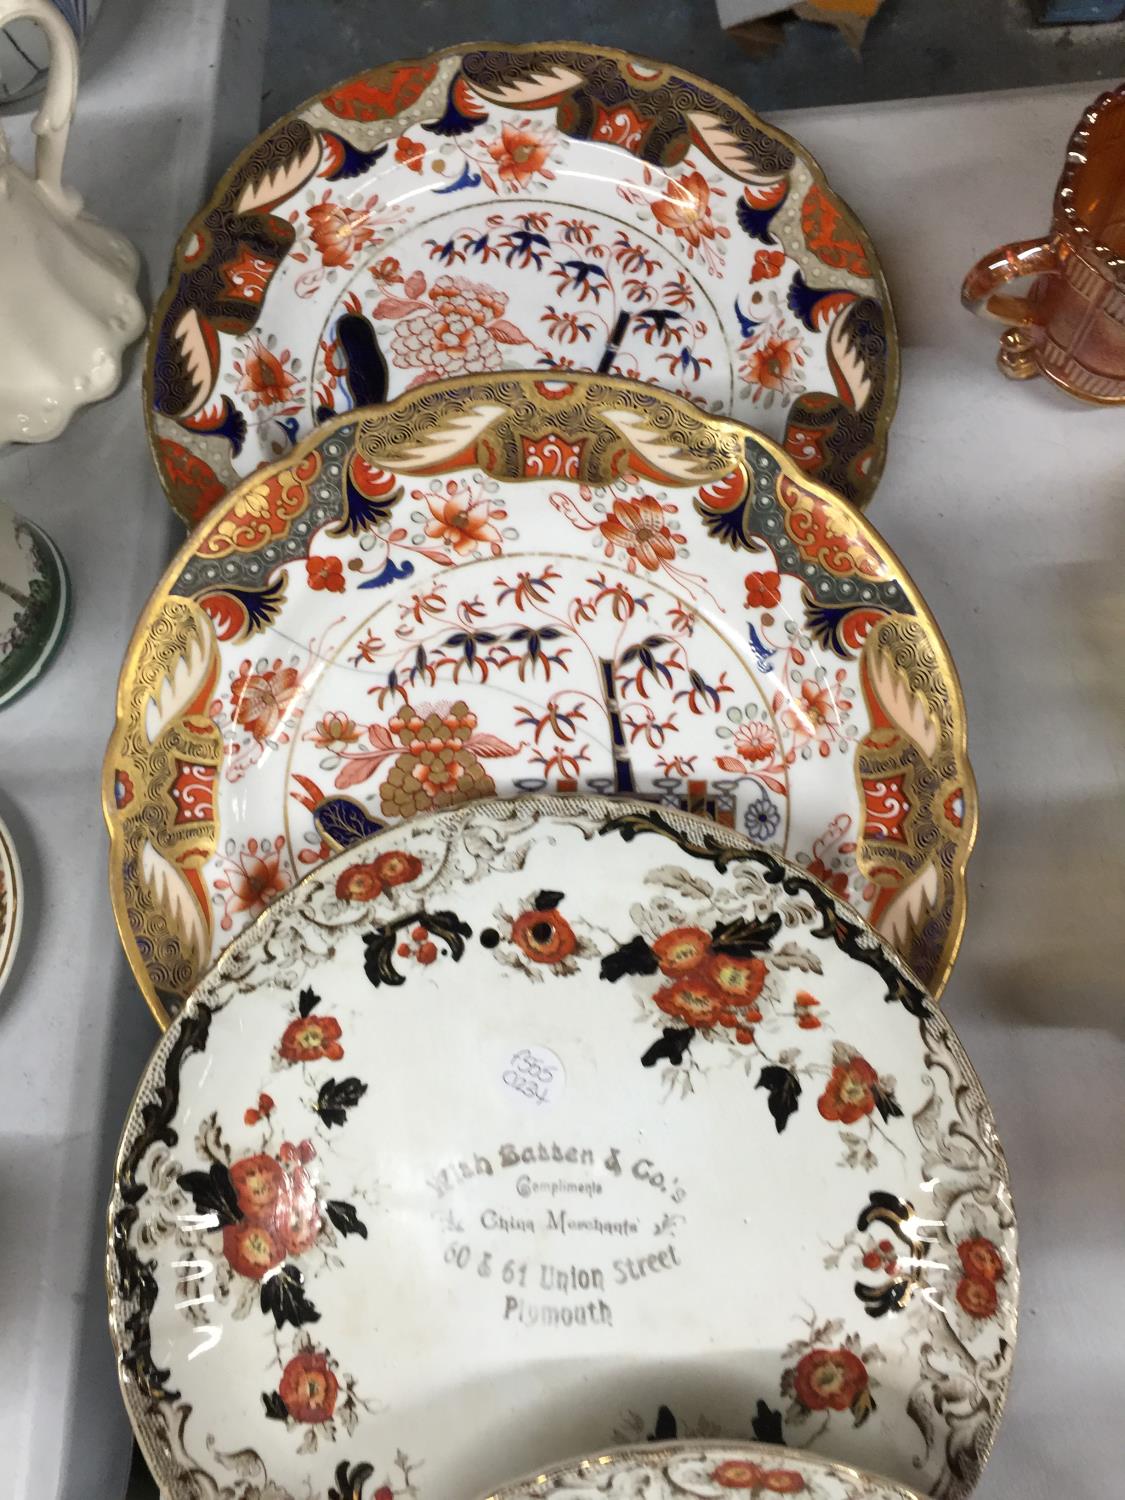 TWO SPODE IMARI STYLE WALL PLATES PLUS TWO WITH 'WITH BATTEN & CO'S COMPLIMENTS@ CHINA MERCHANTS, 60 - Image 3 of 3